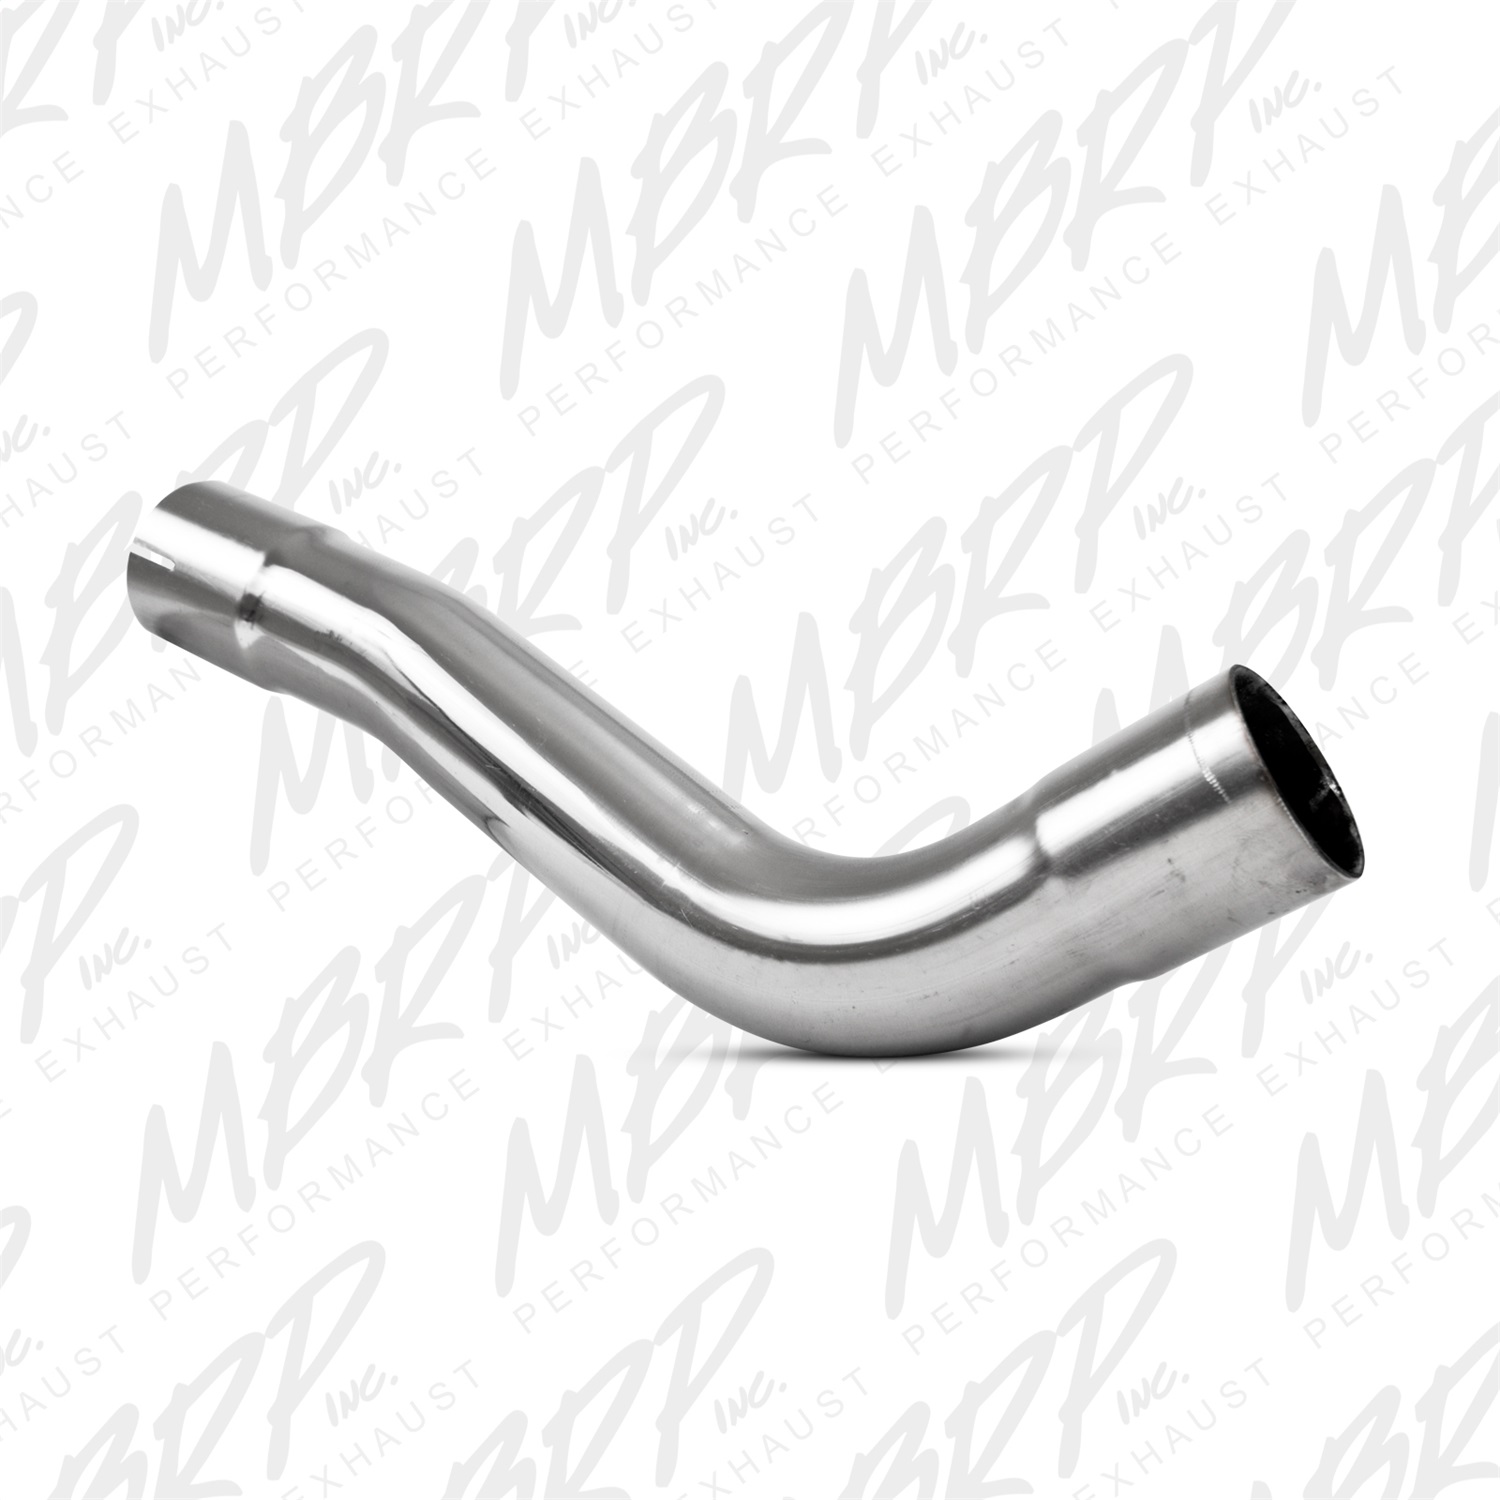 MBRP Exhaust MBRP Exhaust JS9001 Clearance Adapter Pipe Fits 12-13 Wrangler (JK)